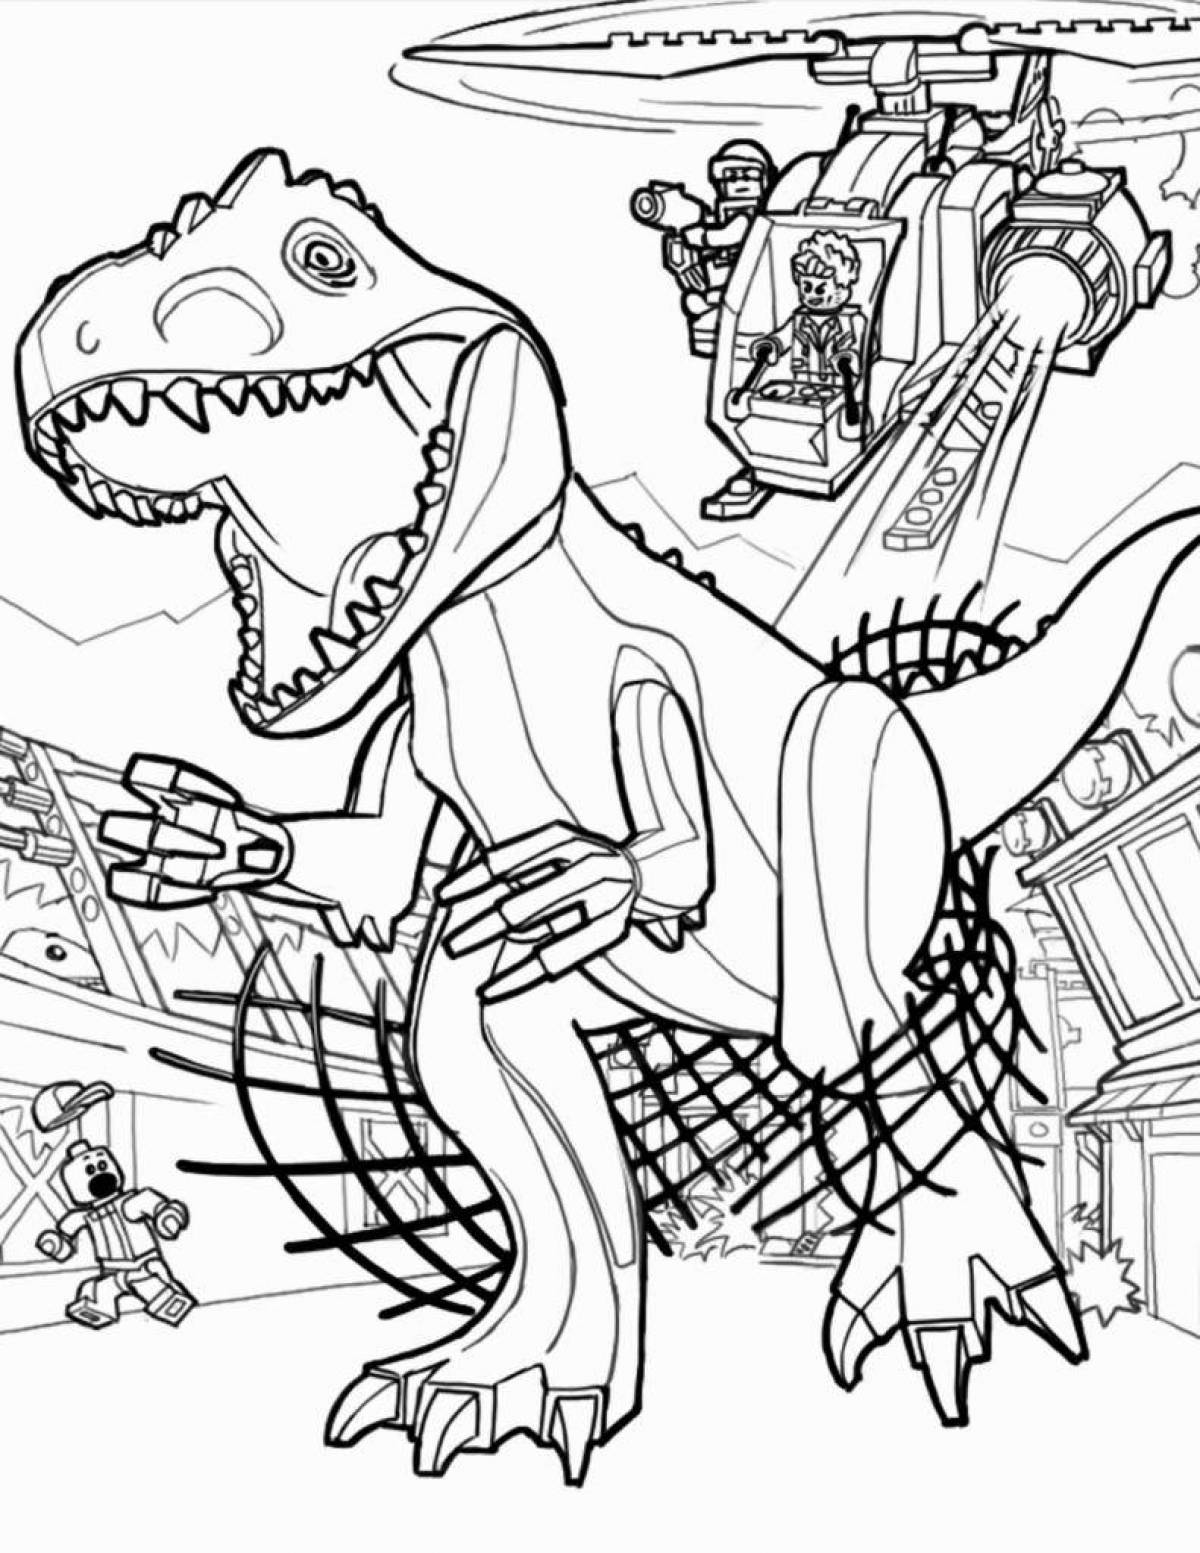 Radiant jurassic world domination coloring page